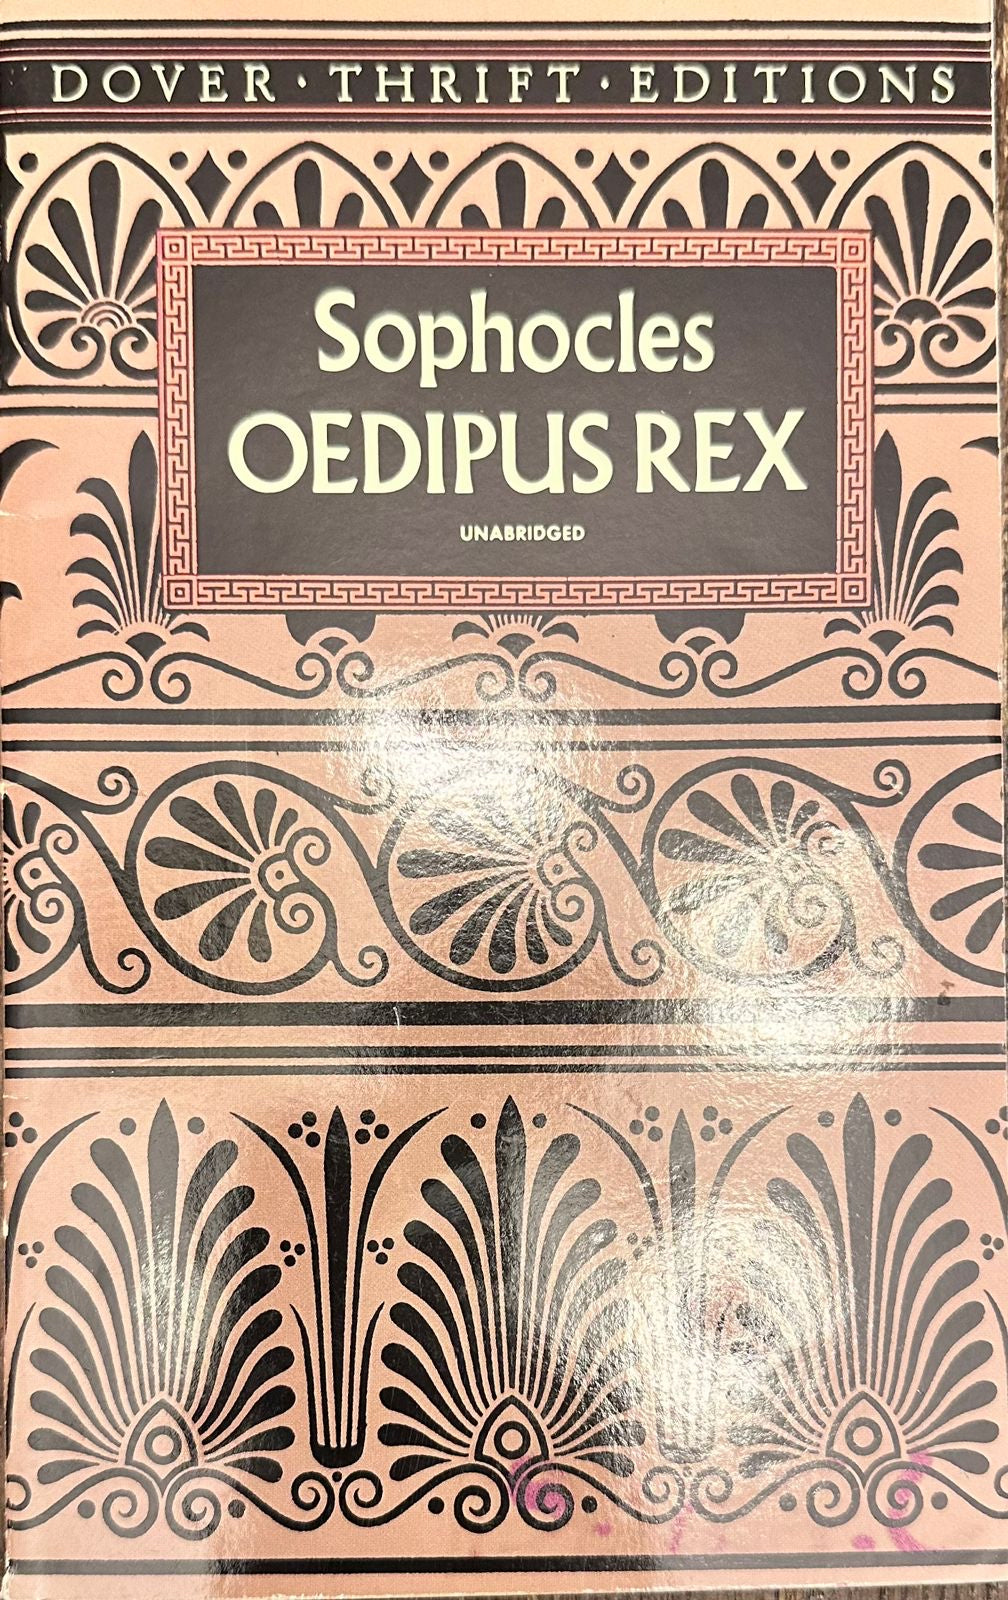 Dover Thrift Editions: Oedipus Rex by Sophocles (Unabridged)